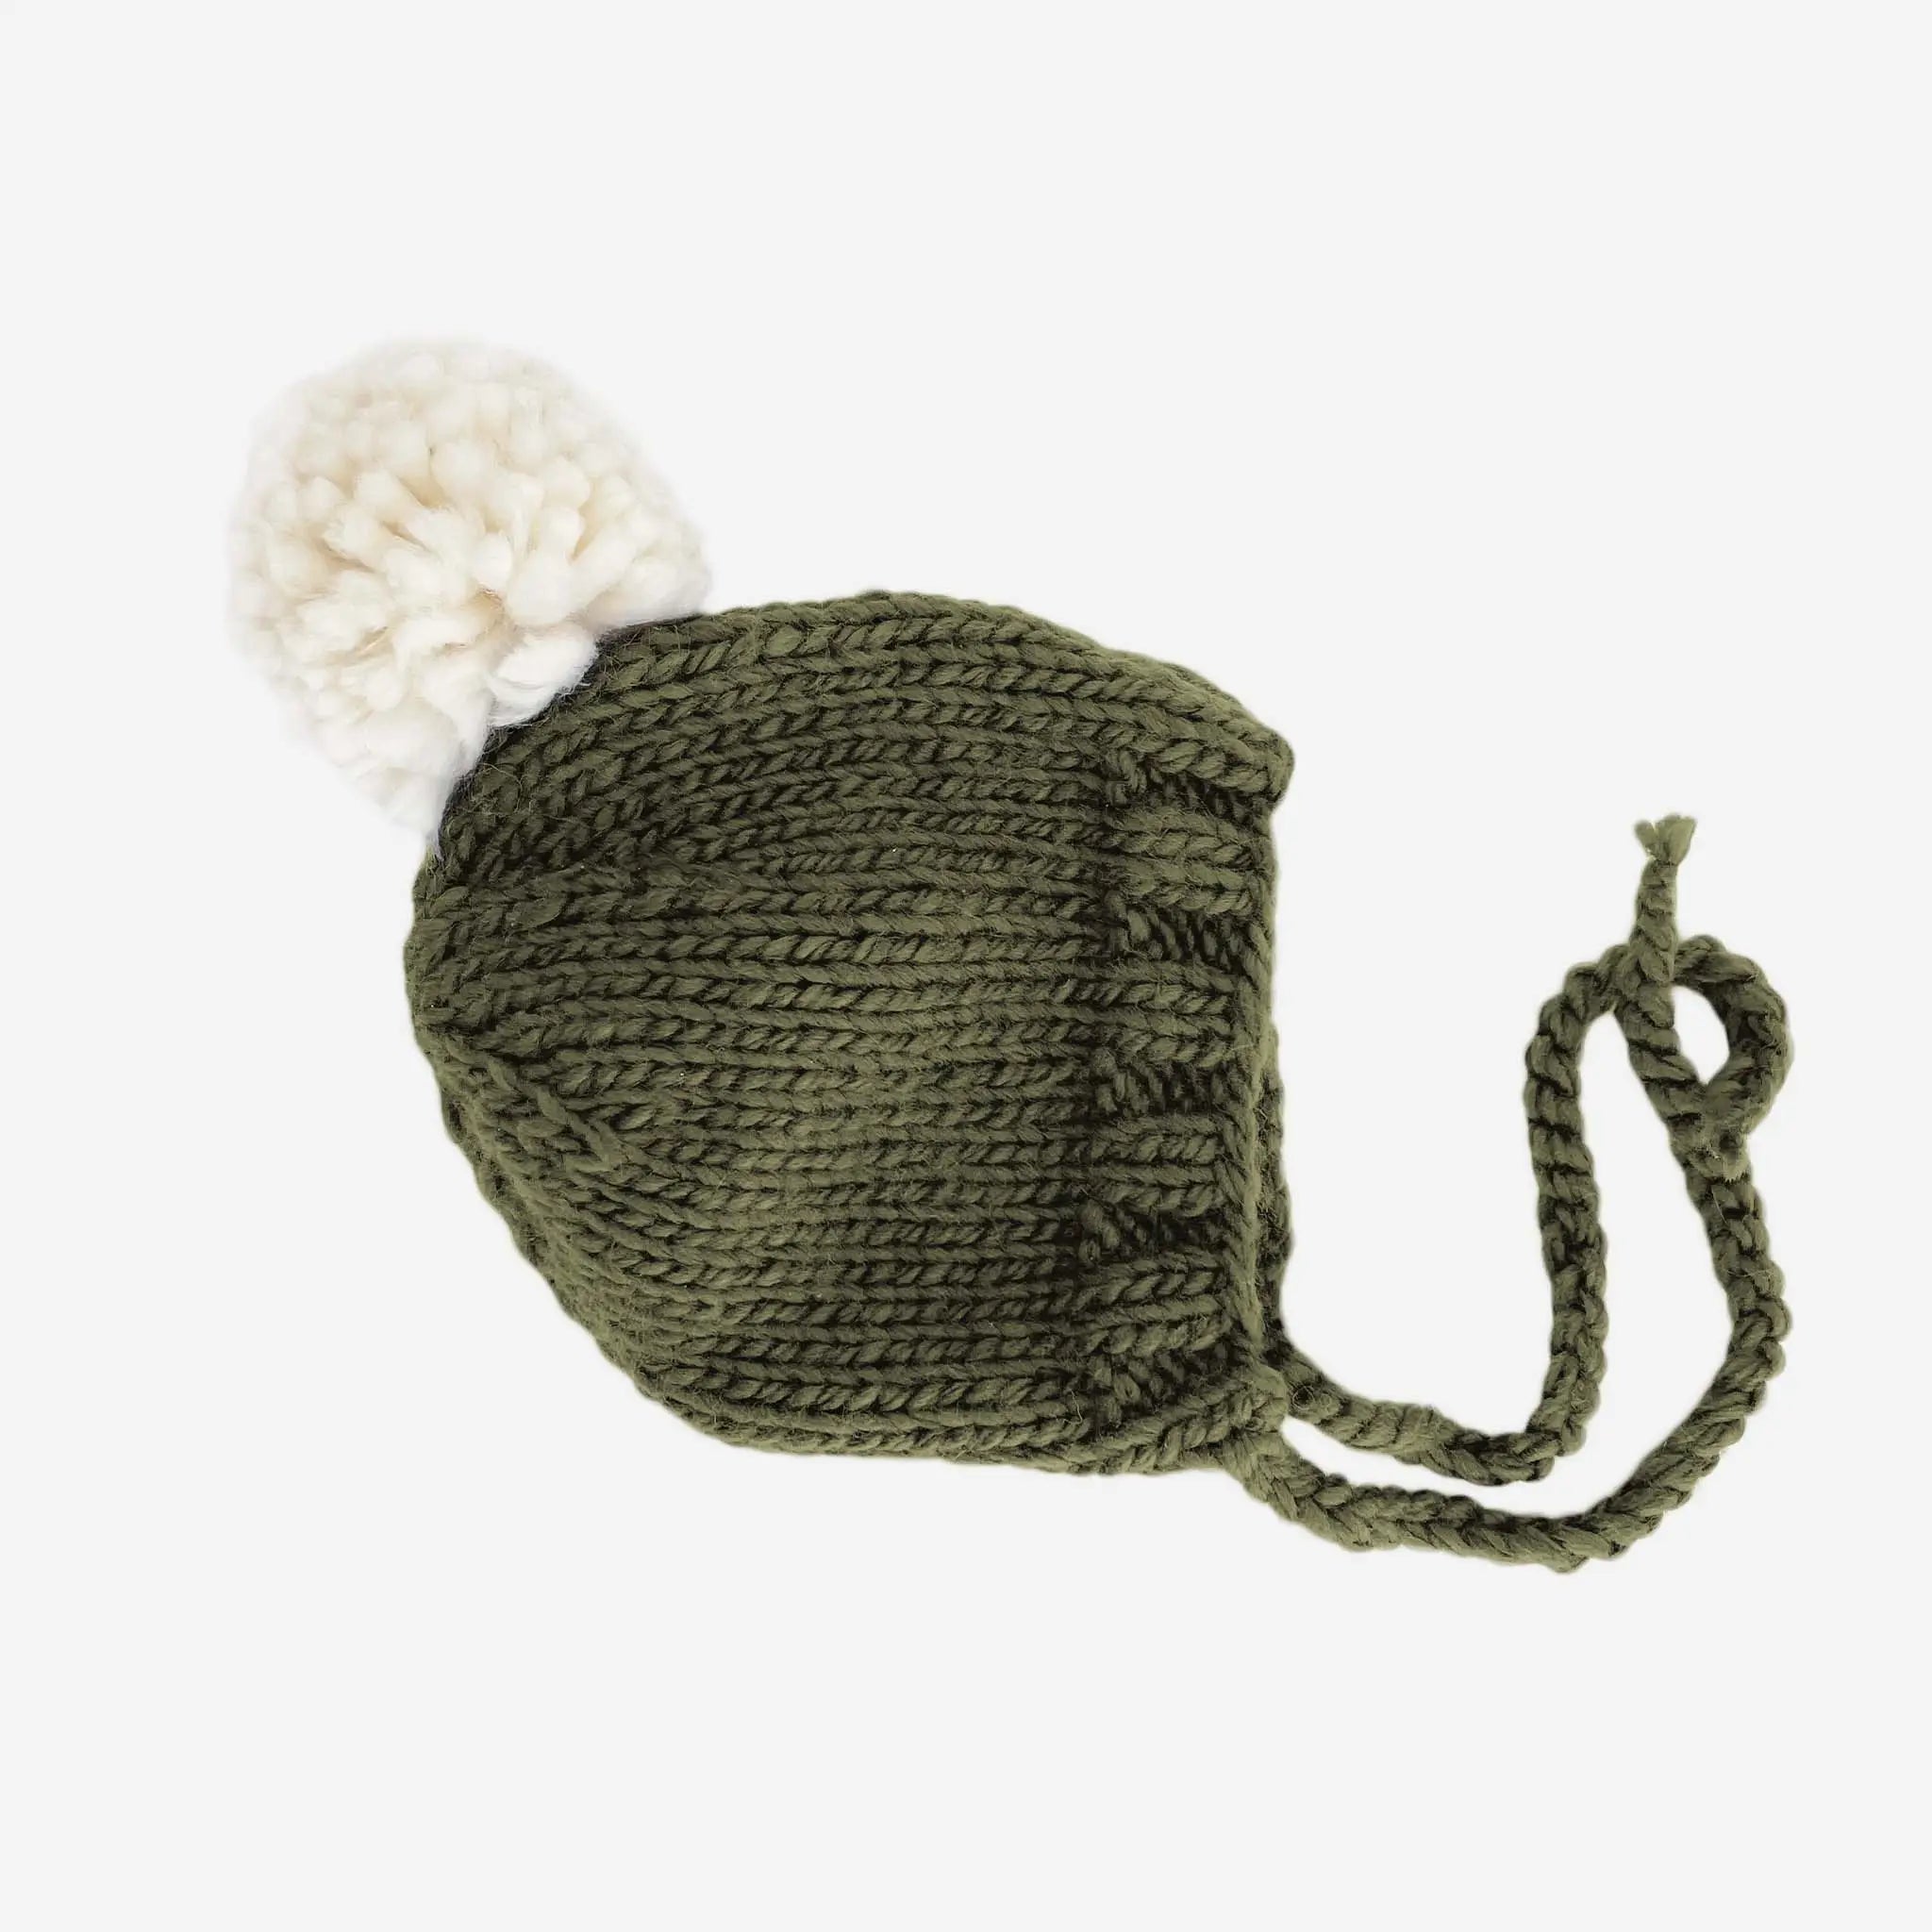 ari bonnet in olive by The Blueberry Hill